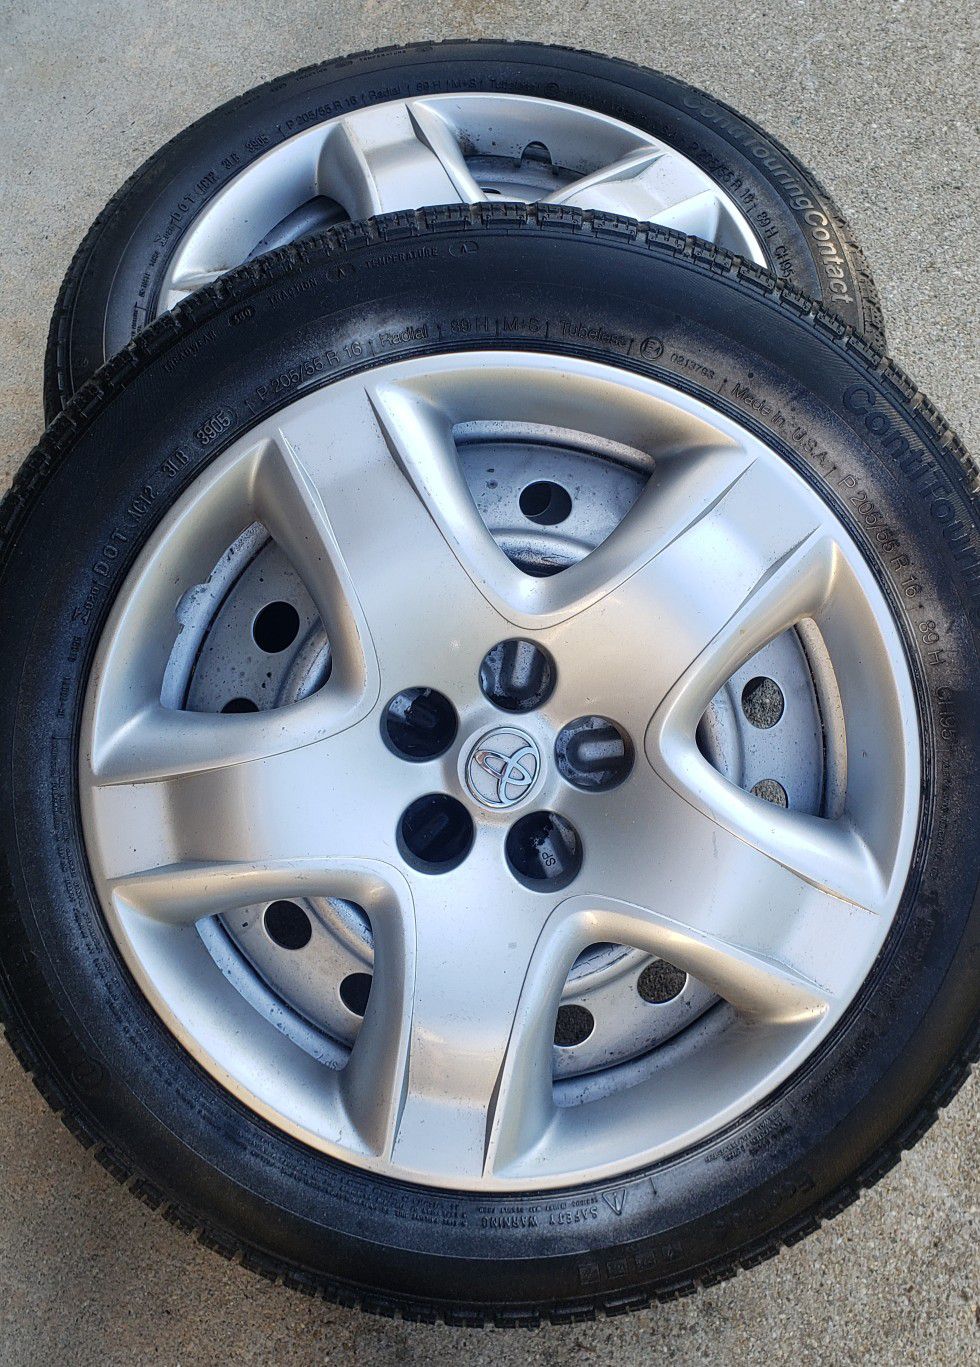 Set of 4 Rims and Tires with hubcaps